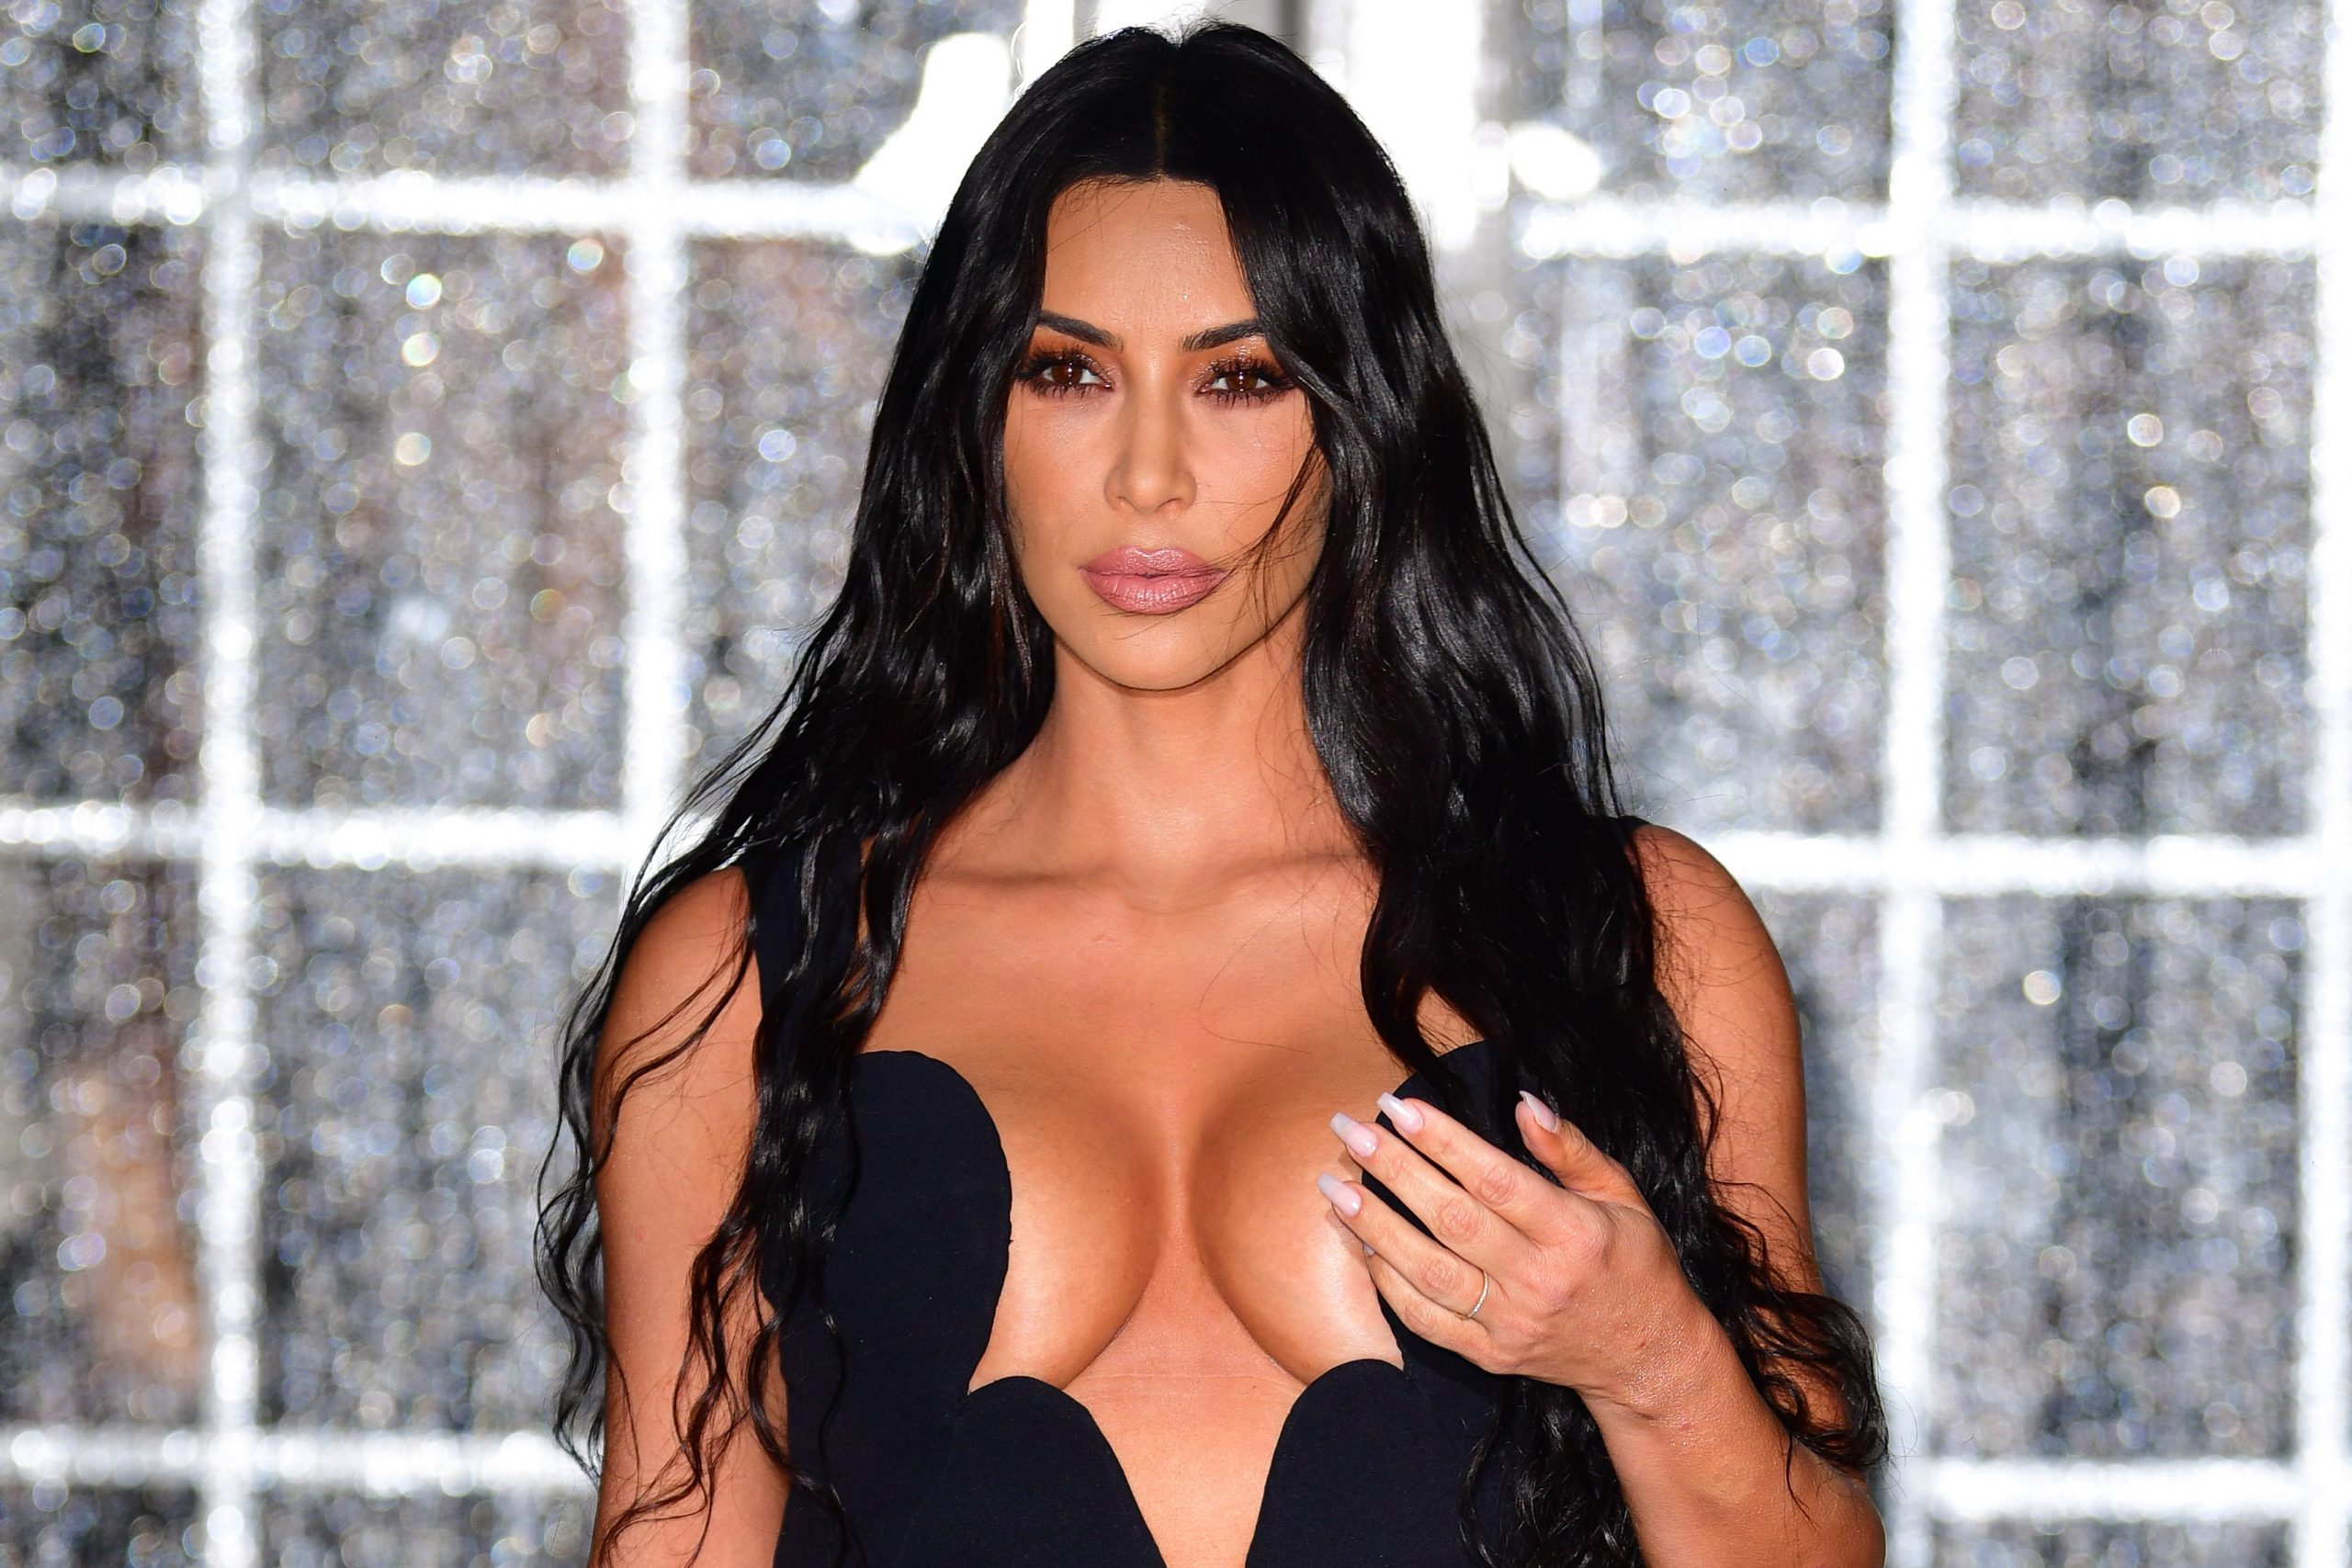  A new report claims that Kim Kardashian's bra size has already grown four cup sizes during her pregnancy. And she's only four months along!